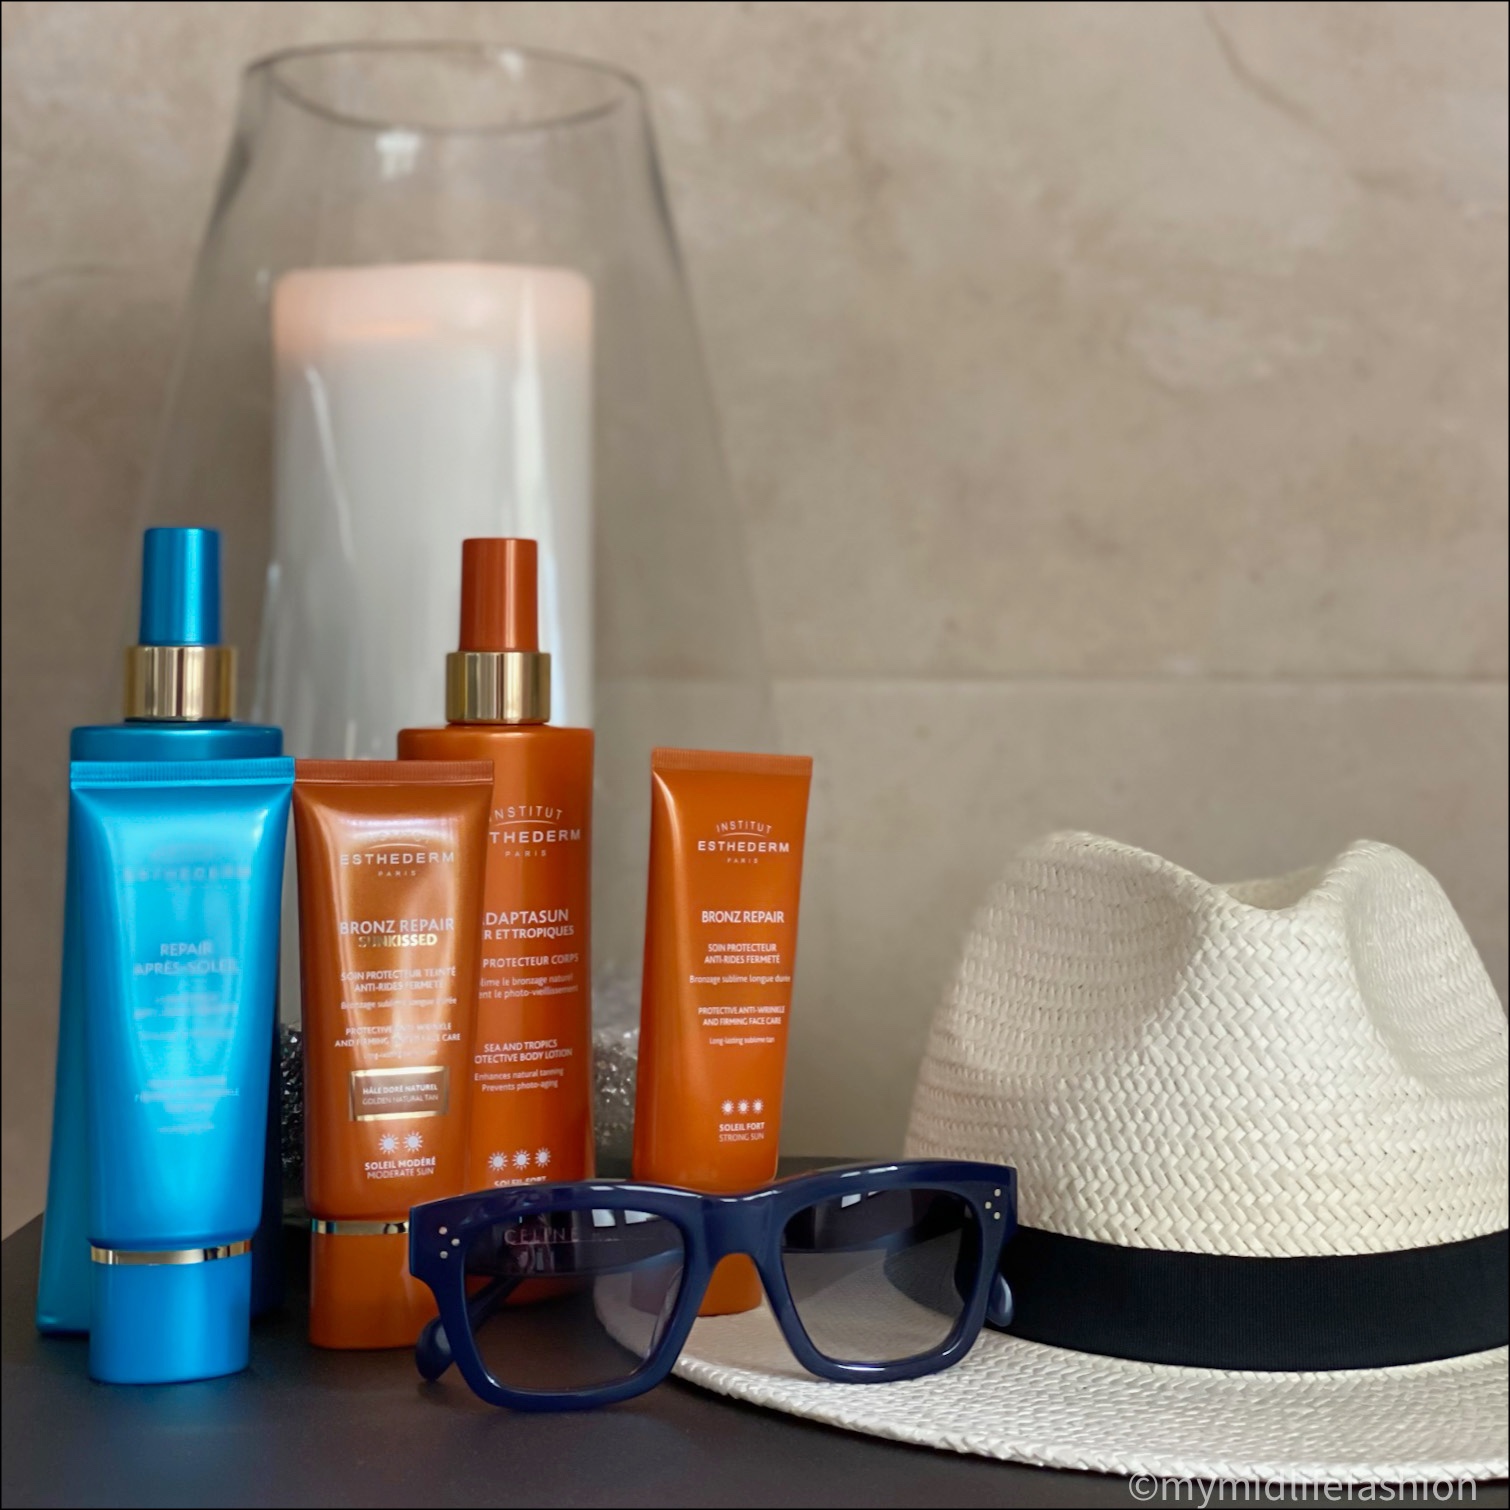 my midlife fashion, institut esthederm, institut esthederm after sun face cream cream, institut esthederm tan prolonging lotion, institut esthederm bronze repair sun kissed, institut esthederm adaptasun sea and tropics protective body lotion, institut esthederm bronze repair